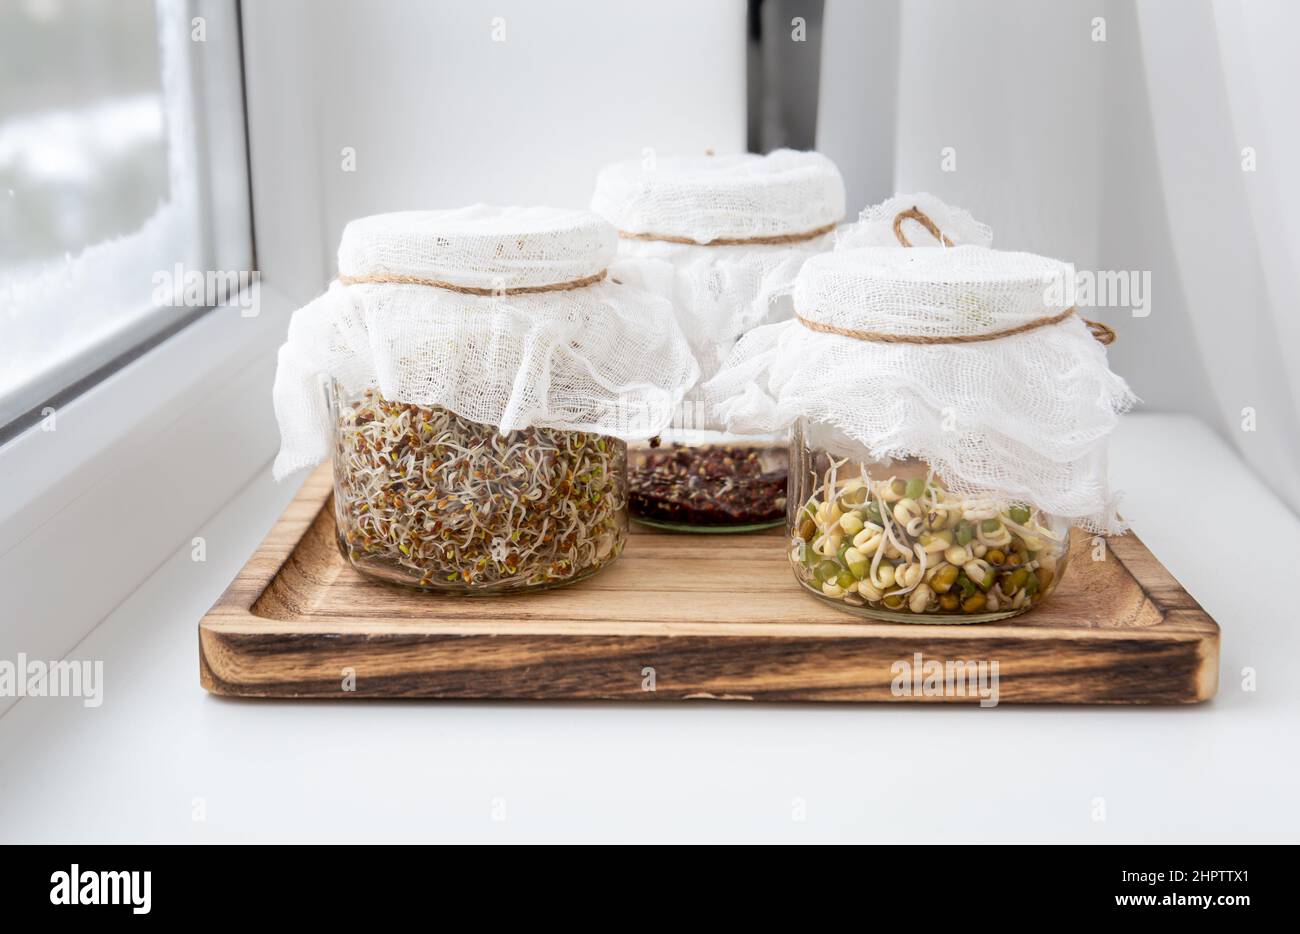 Various seed sprouts growing in glass jars, healthy vitamin rich food snack. Lucerne or Alfalfa, mung bean sprouts, broccoli sprouts seeds in jars. Stock Photo